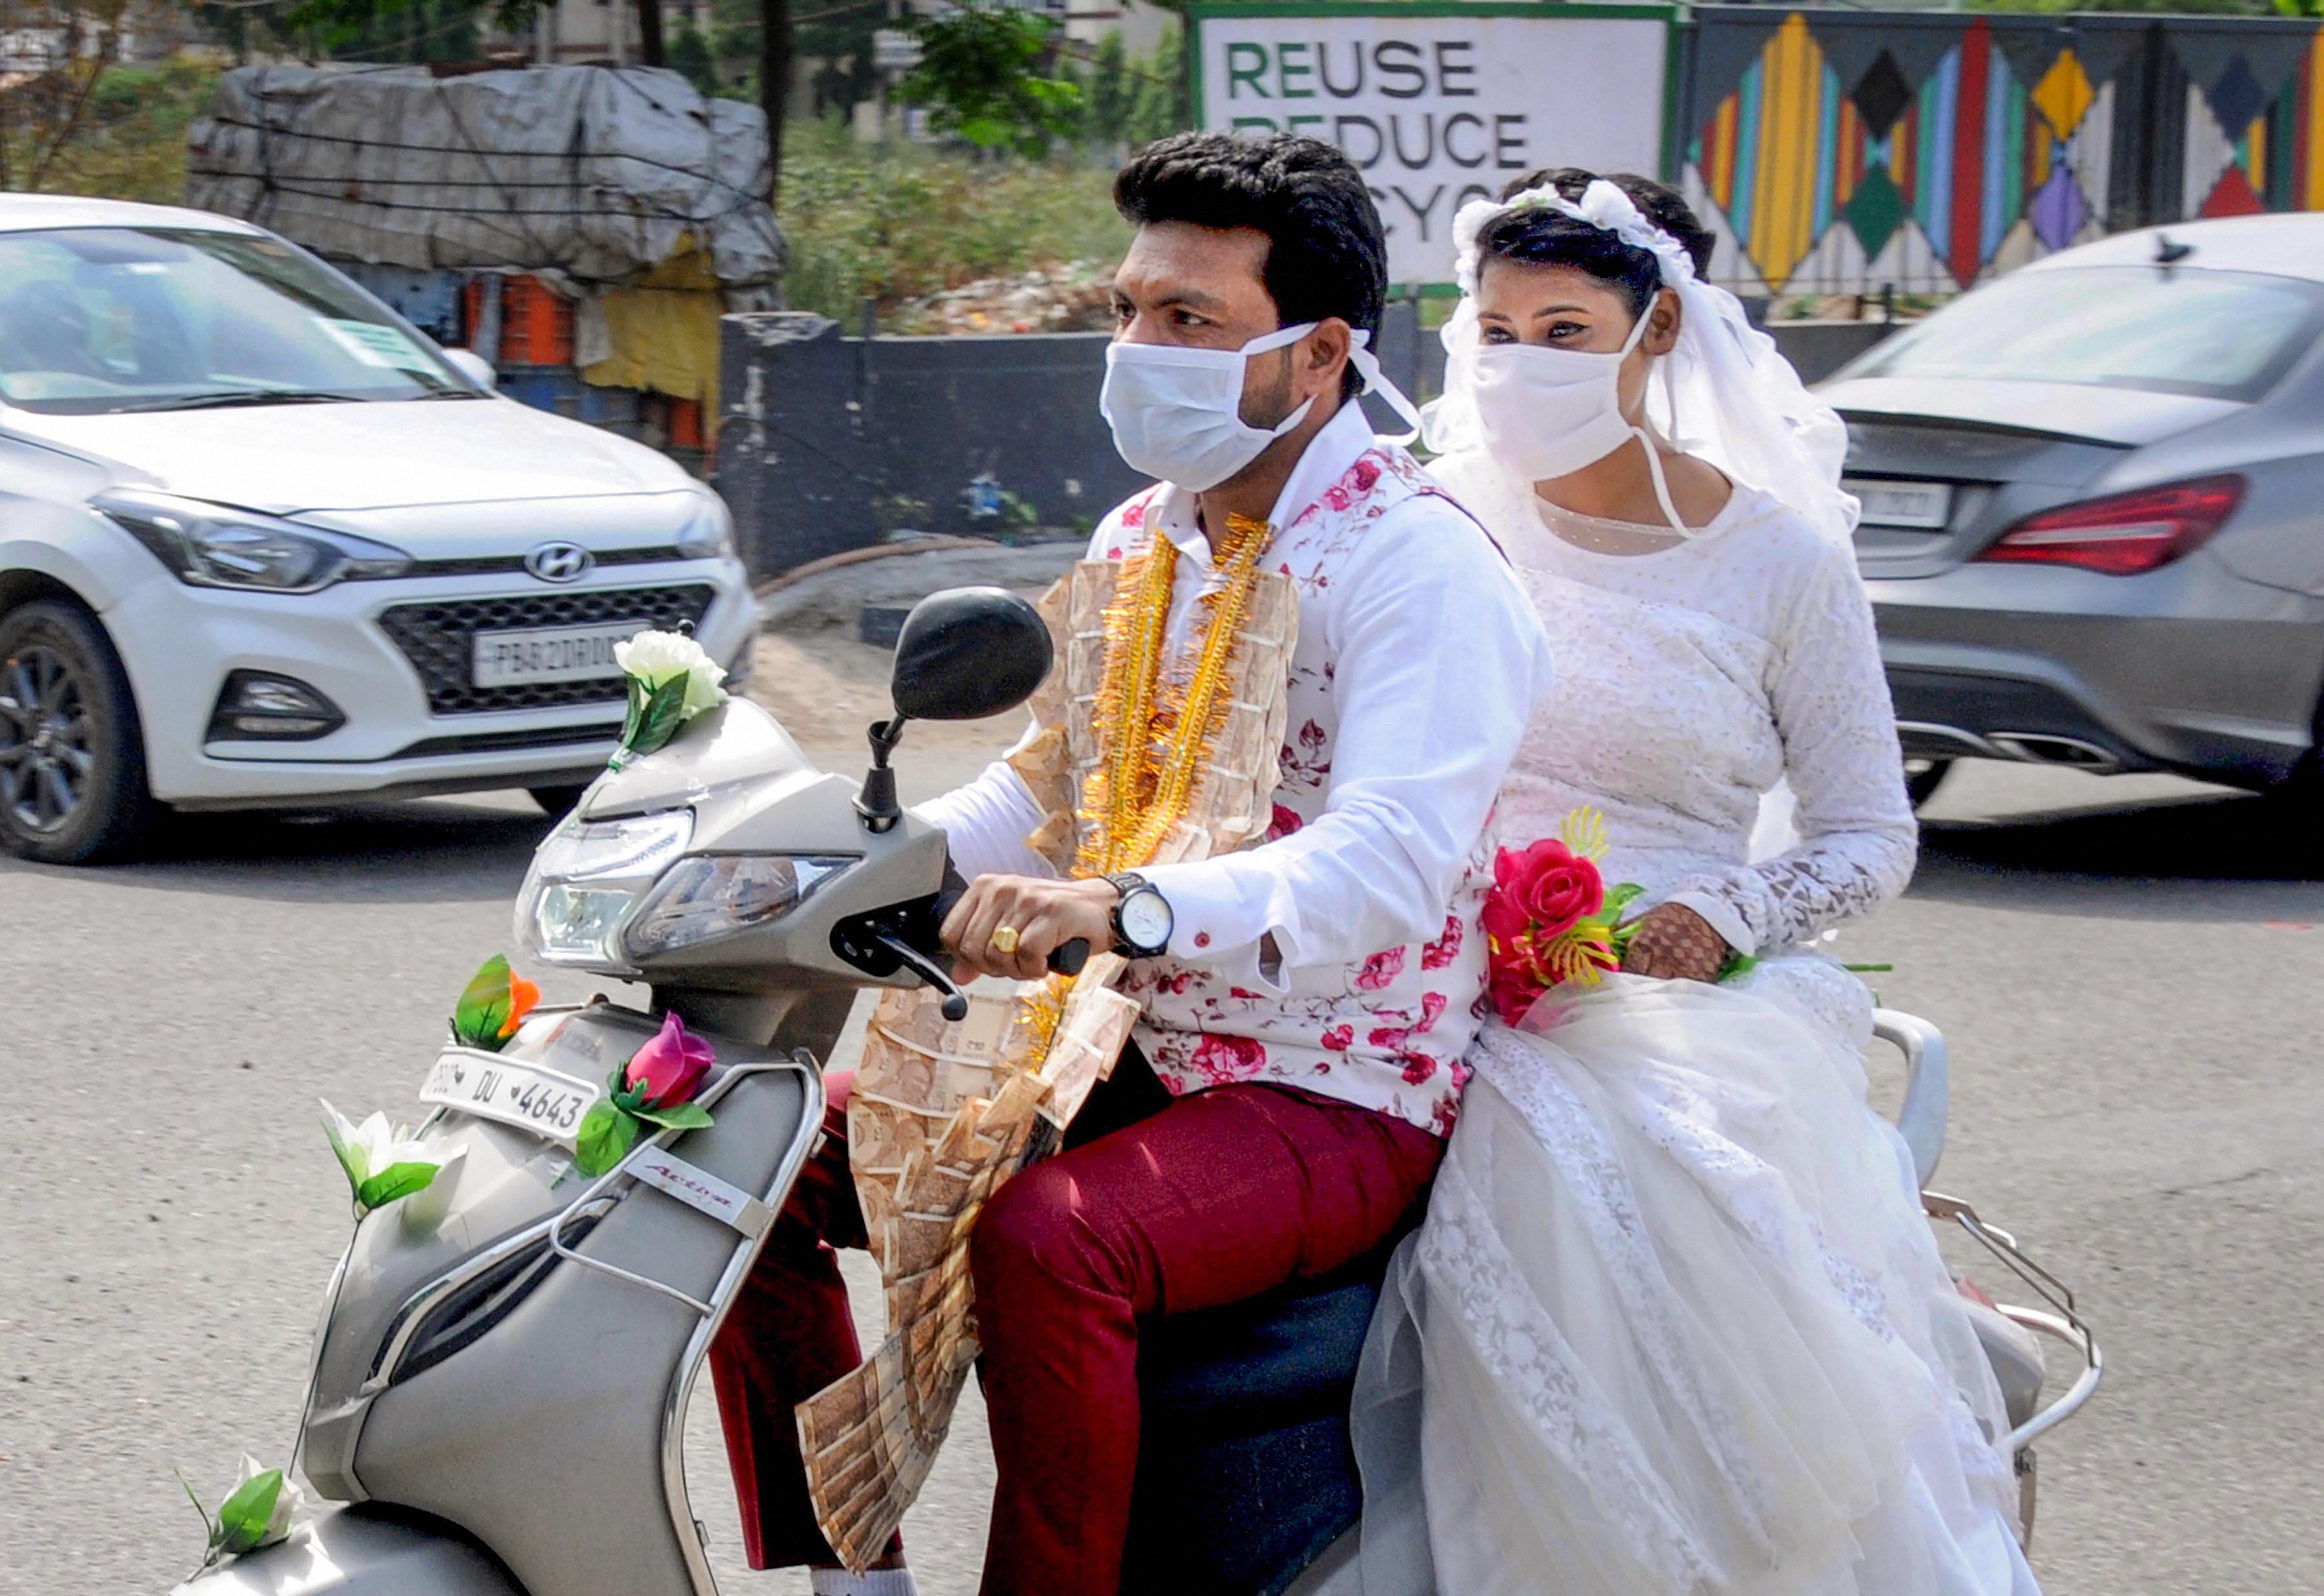 A newly-wed Christian couple ride on a scooter after their marriage ceremony during the ongoing nationwide COVID-19 lockdown, in Amritsar. (PTI photo)